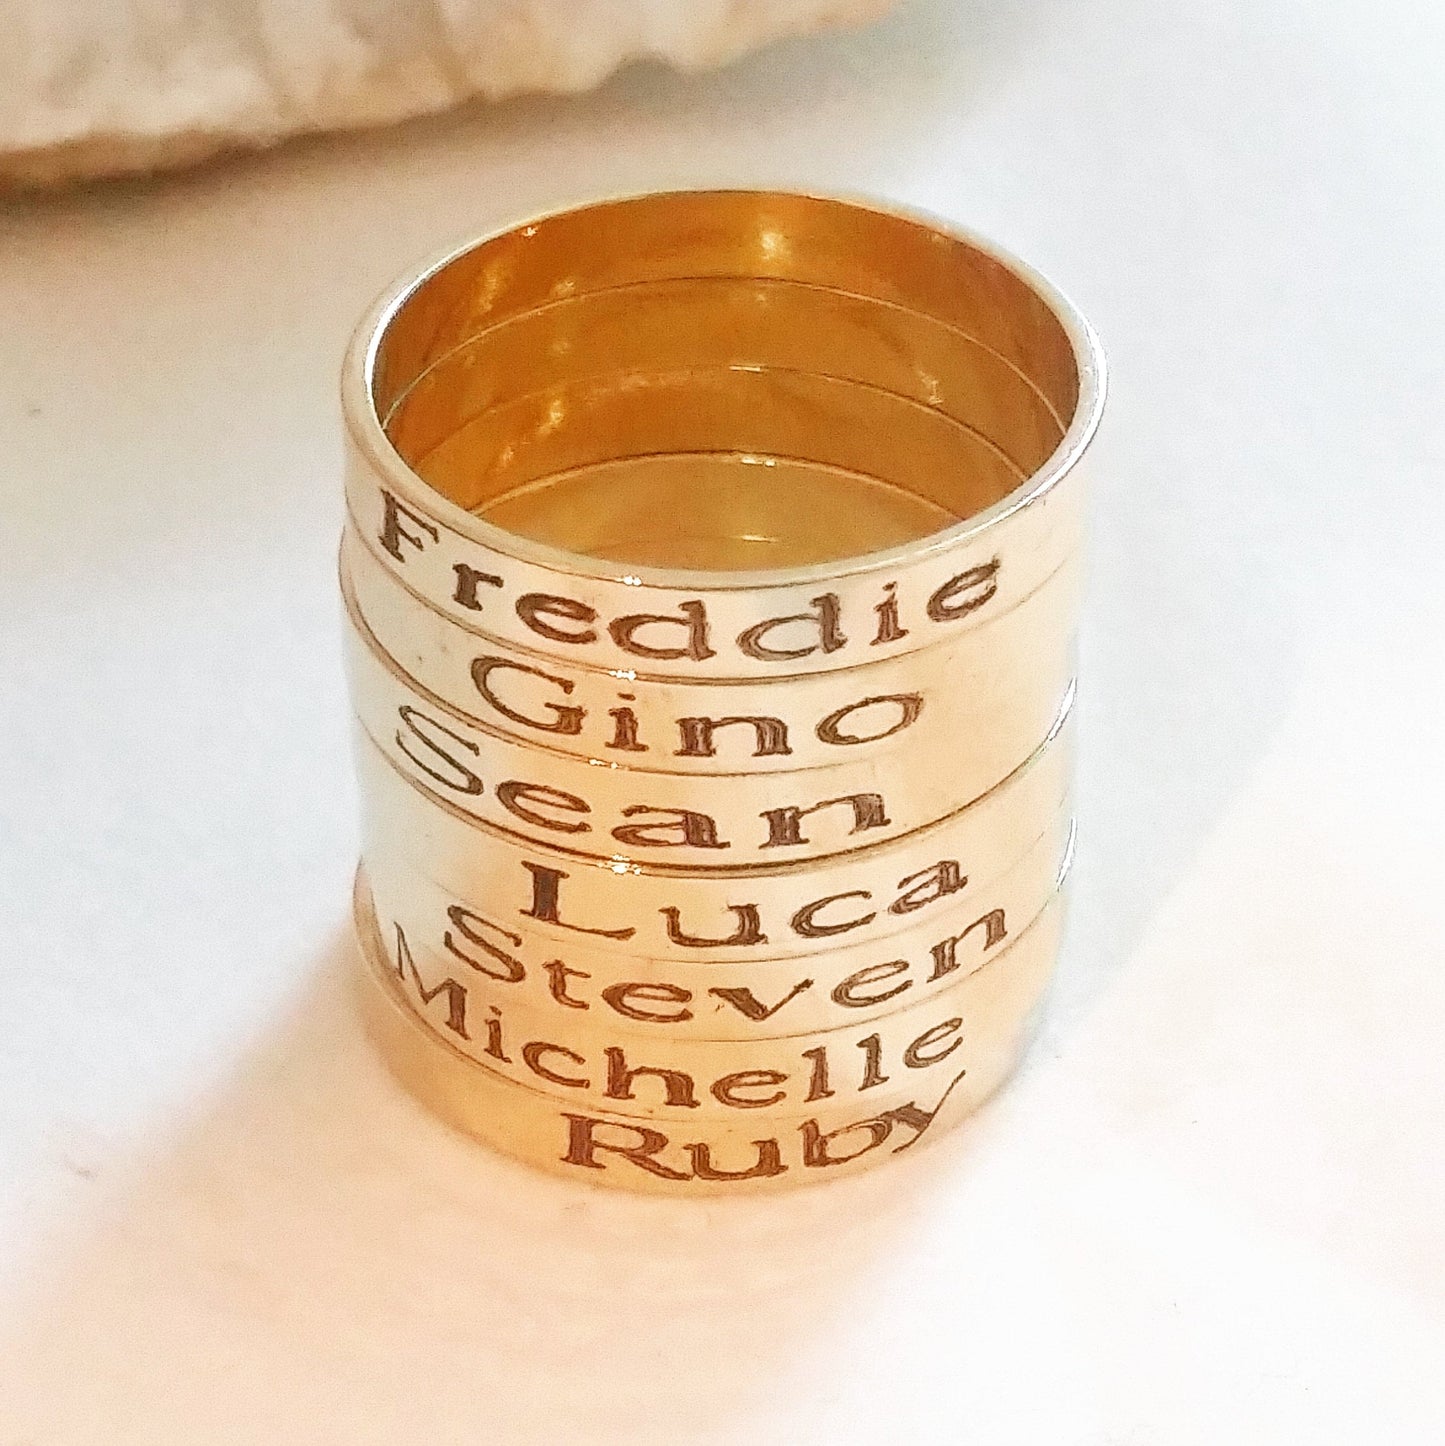 Custom handwriting engraved on adjustable ring band in silver, gold or rose gold